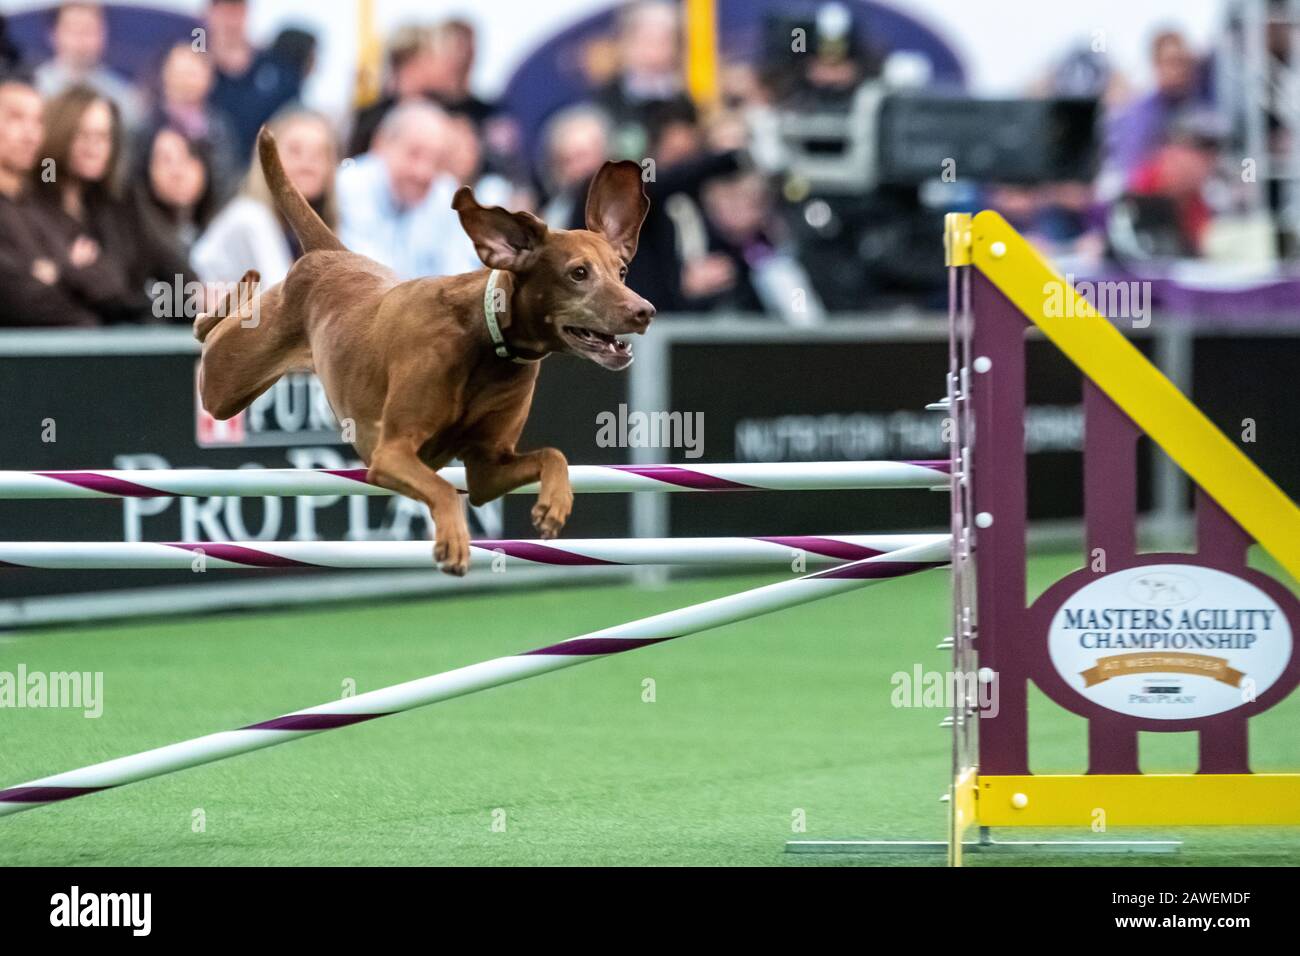 New York, USA. 8th Feb, 2020. Melody, a Vizsla, clears an obstacle during the qualifying round of The Westminster Kennel Club Dog show Masters Agility Championship in New York city. Credit: Enrique Shore/Alamy Live News Stock Photo